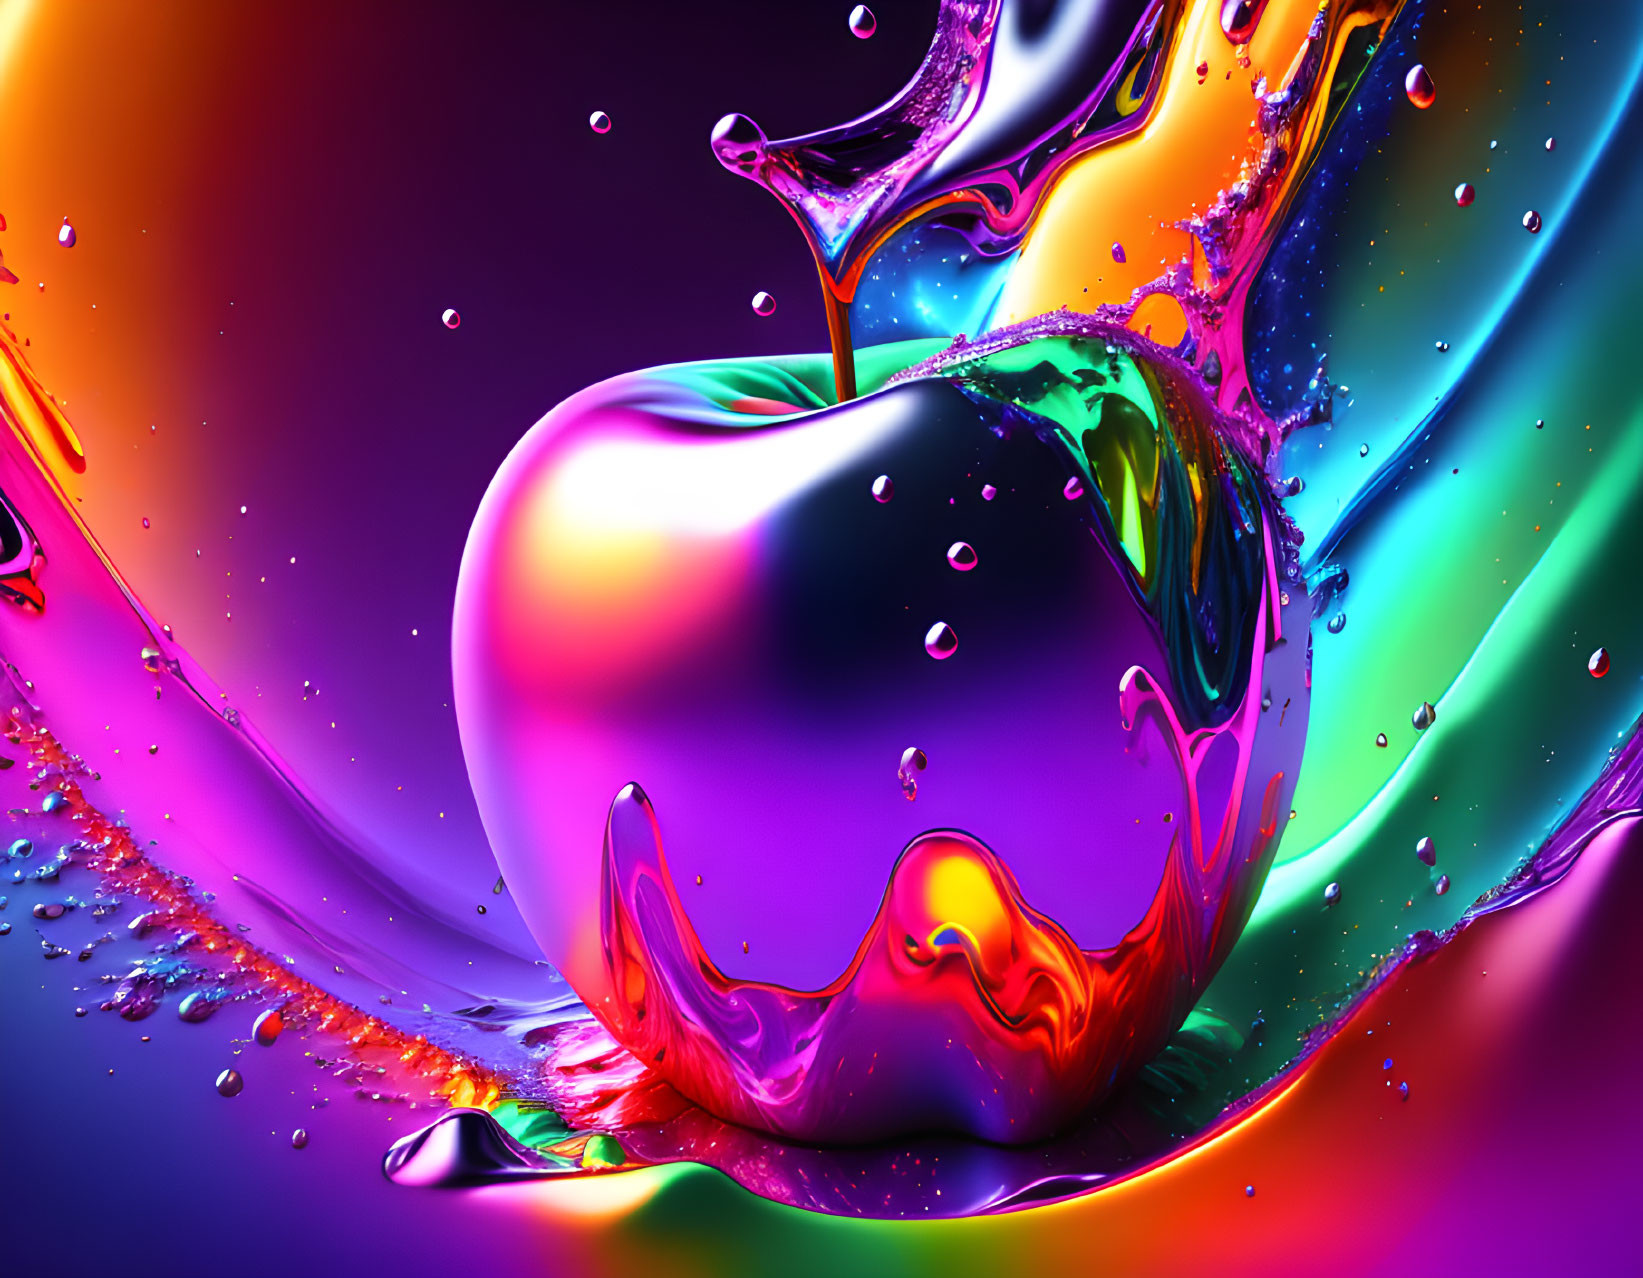 Colorful Abstract Image: Glossy Apple Surrounded by Rainbow Liquid Splashes